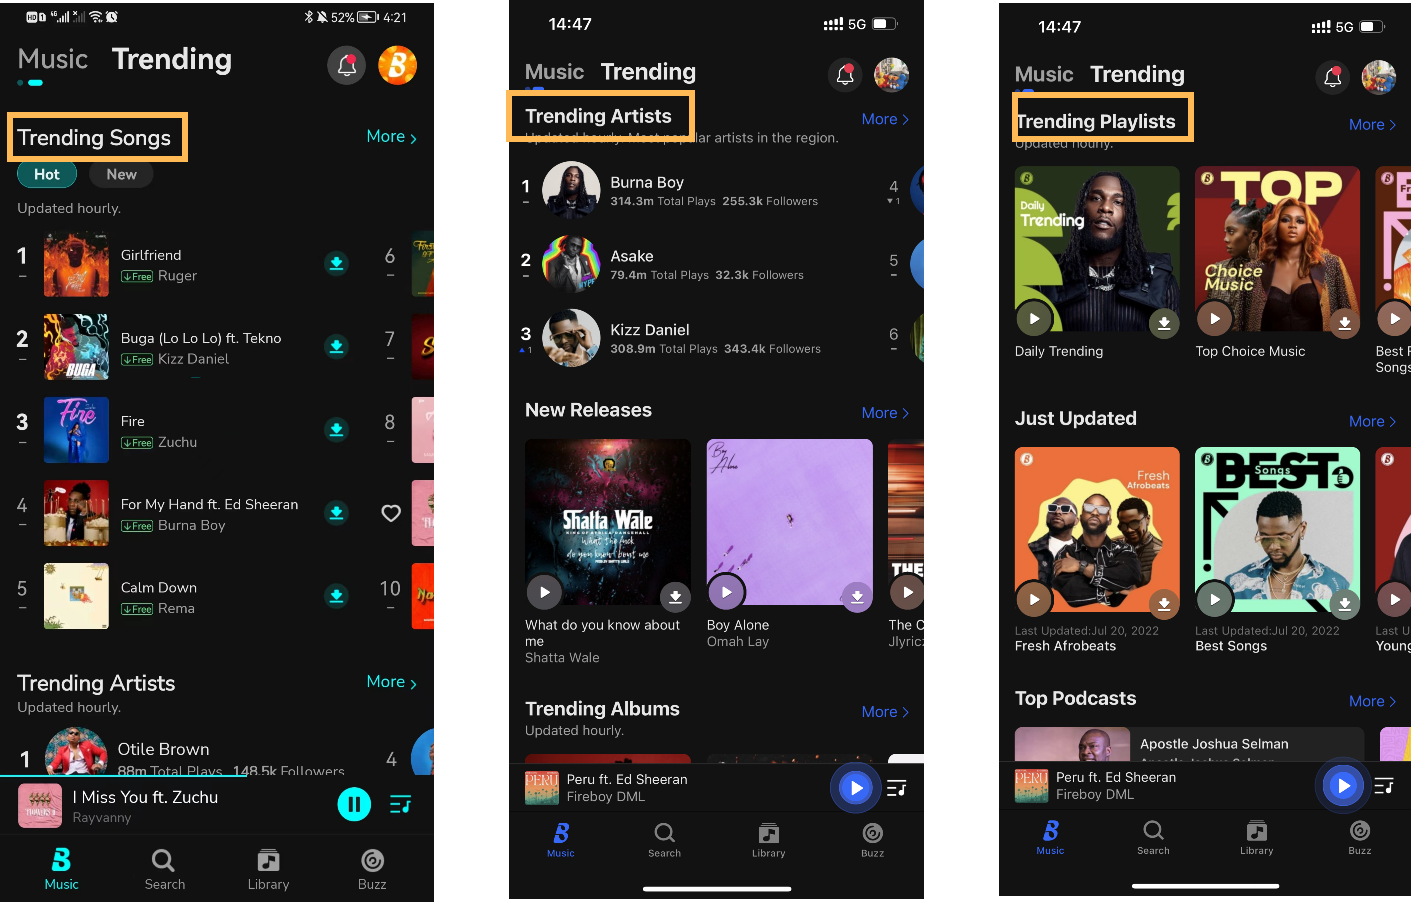 Master All Music Trends Anytime, Anywhere with New Updates